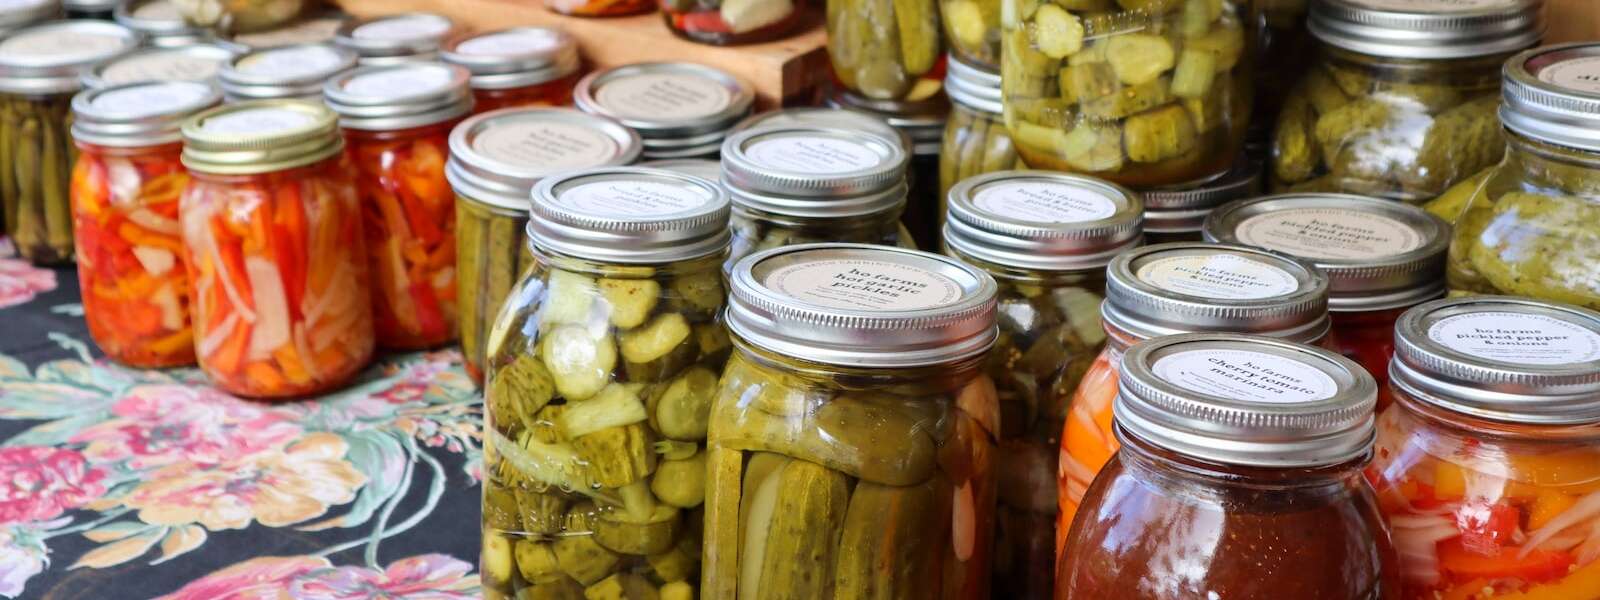 Clear glass jars with pickled goods inside